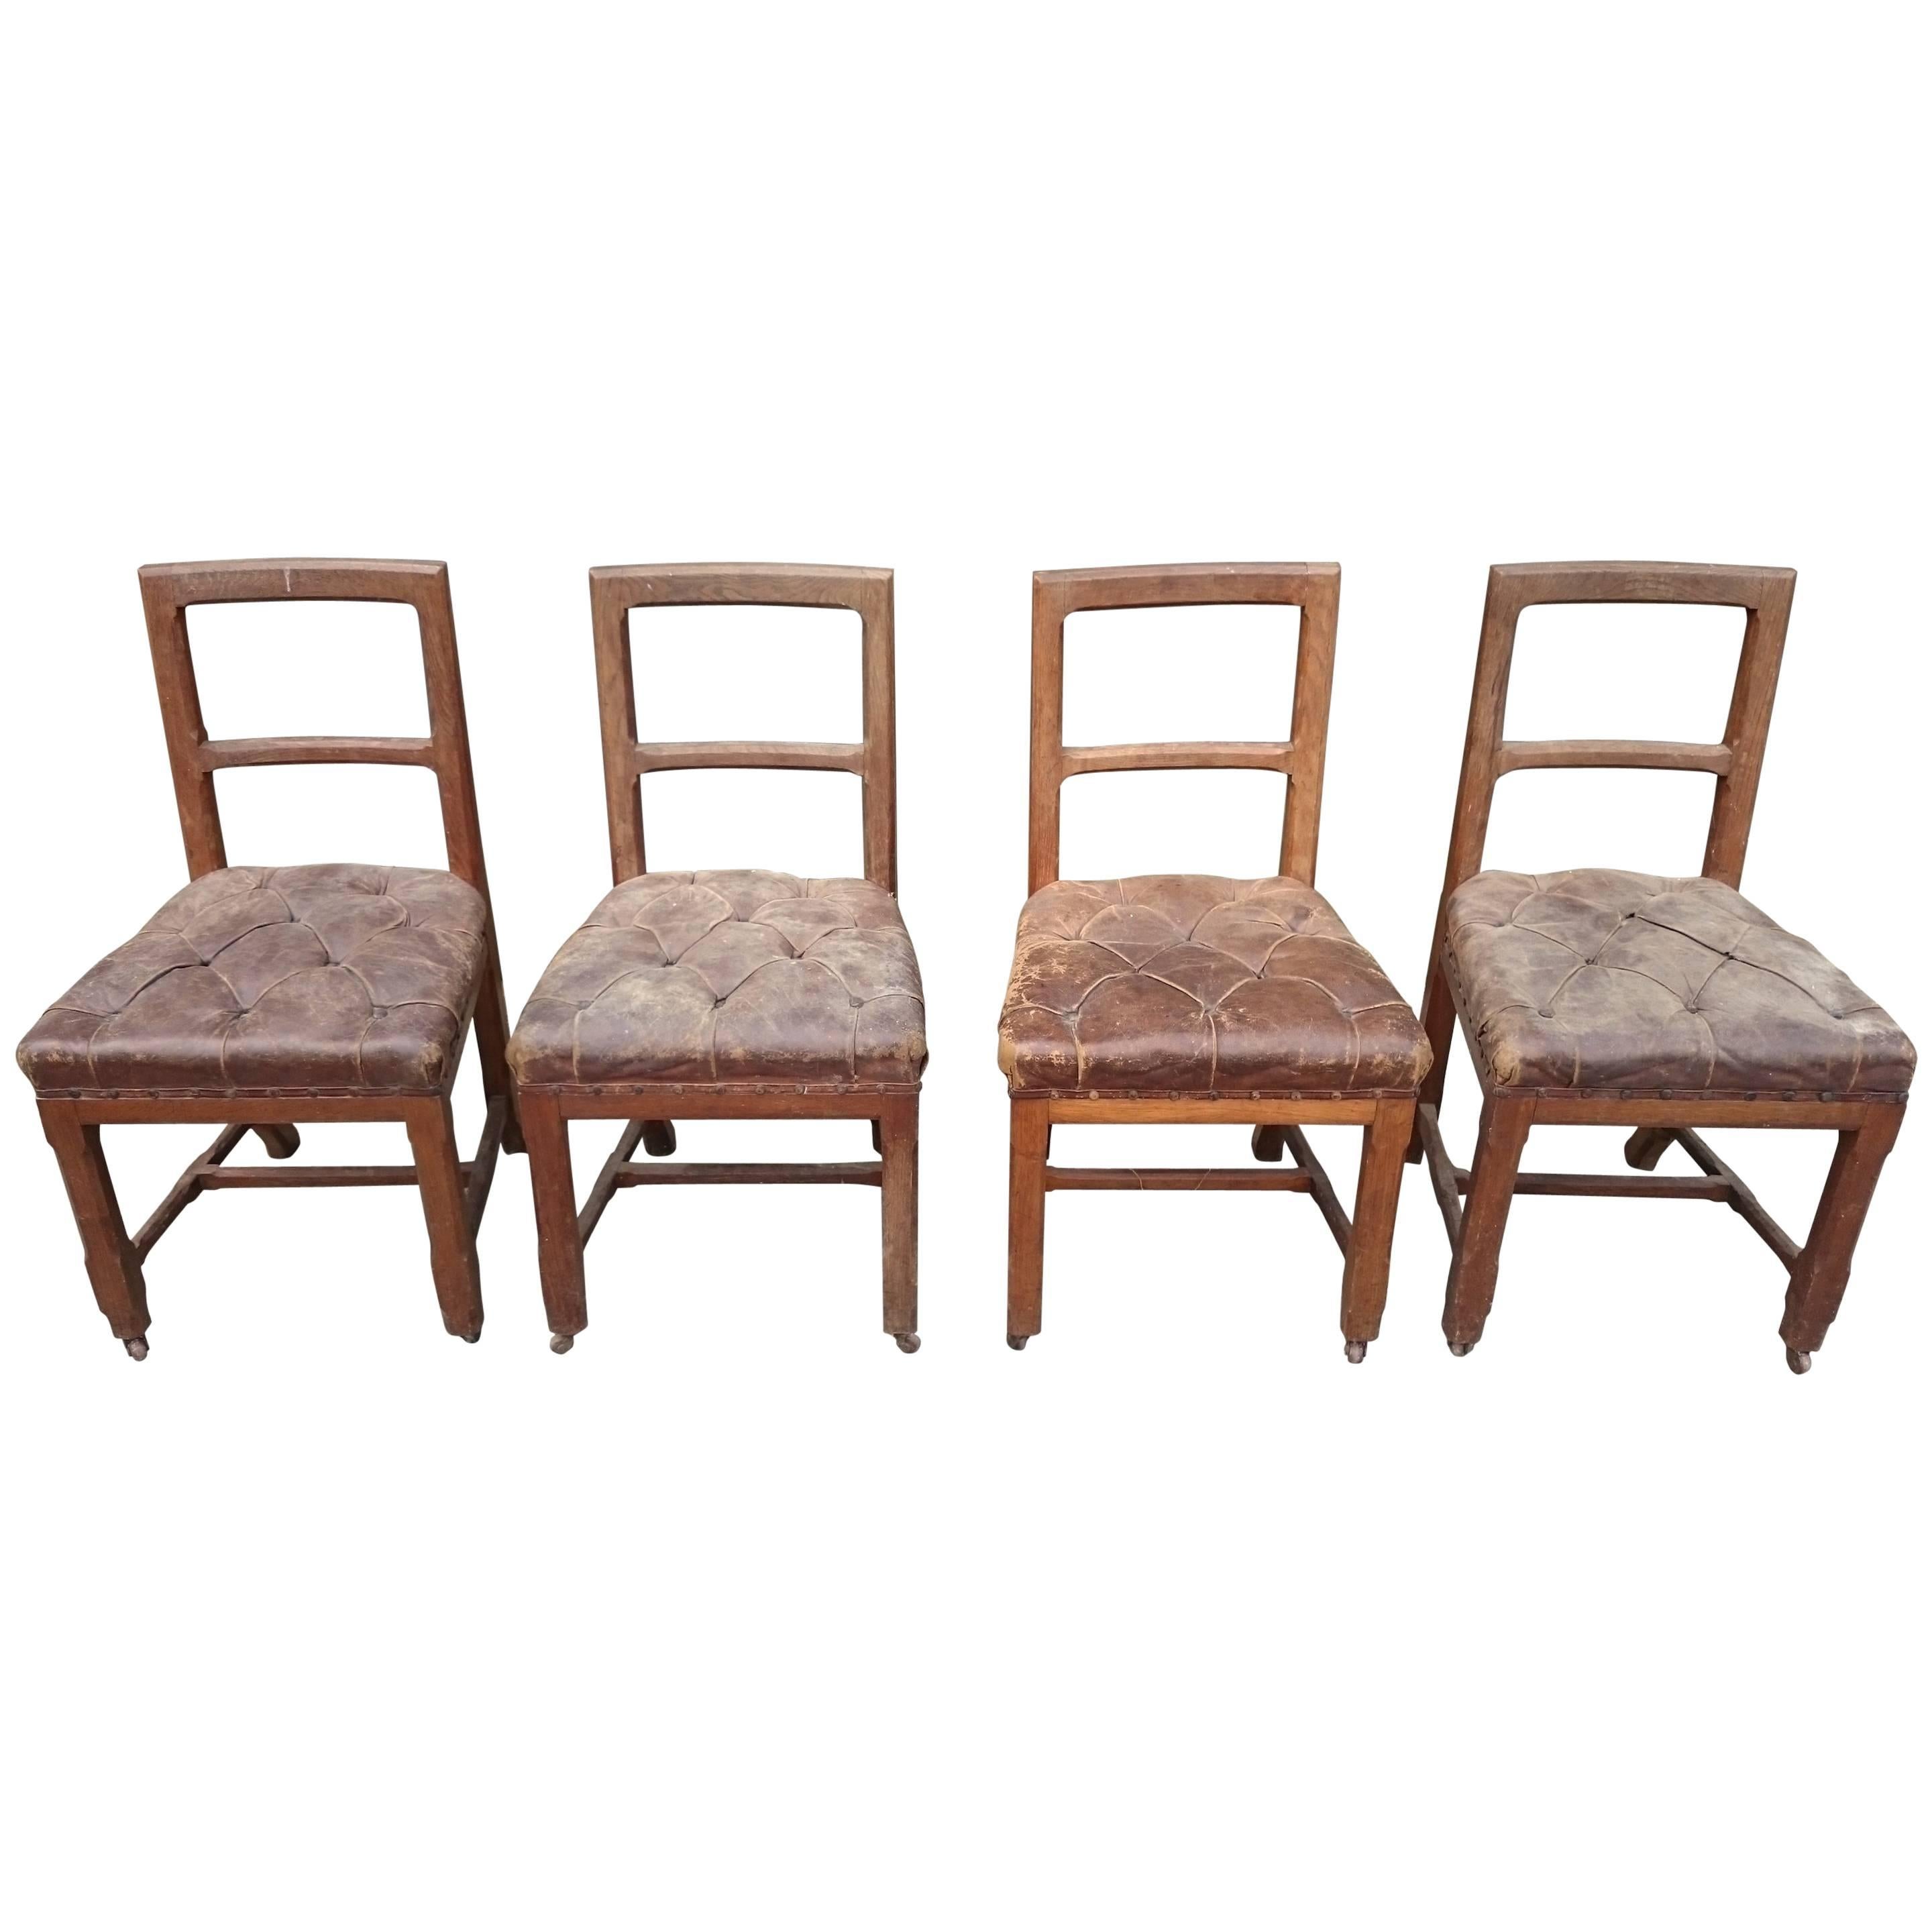 Original Leather Oak Gothic Revival Set of Four Chairs For Sale